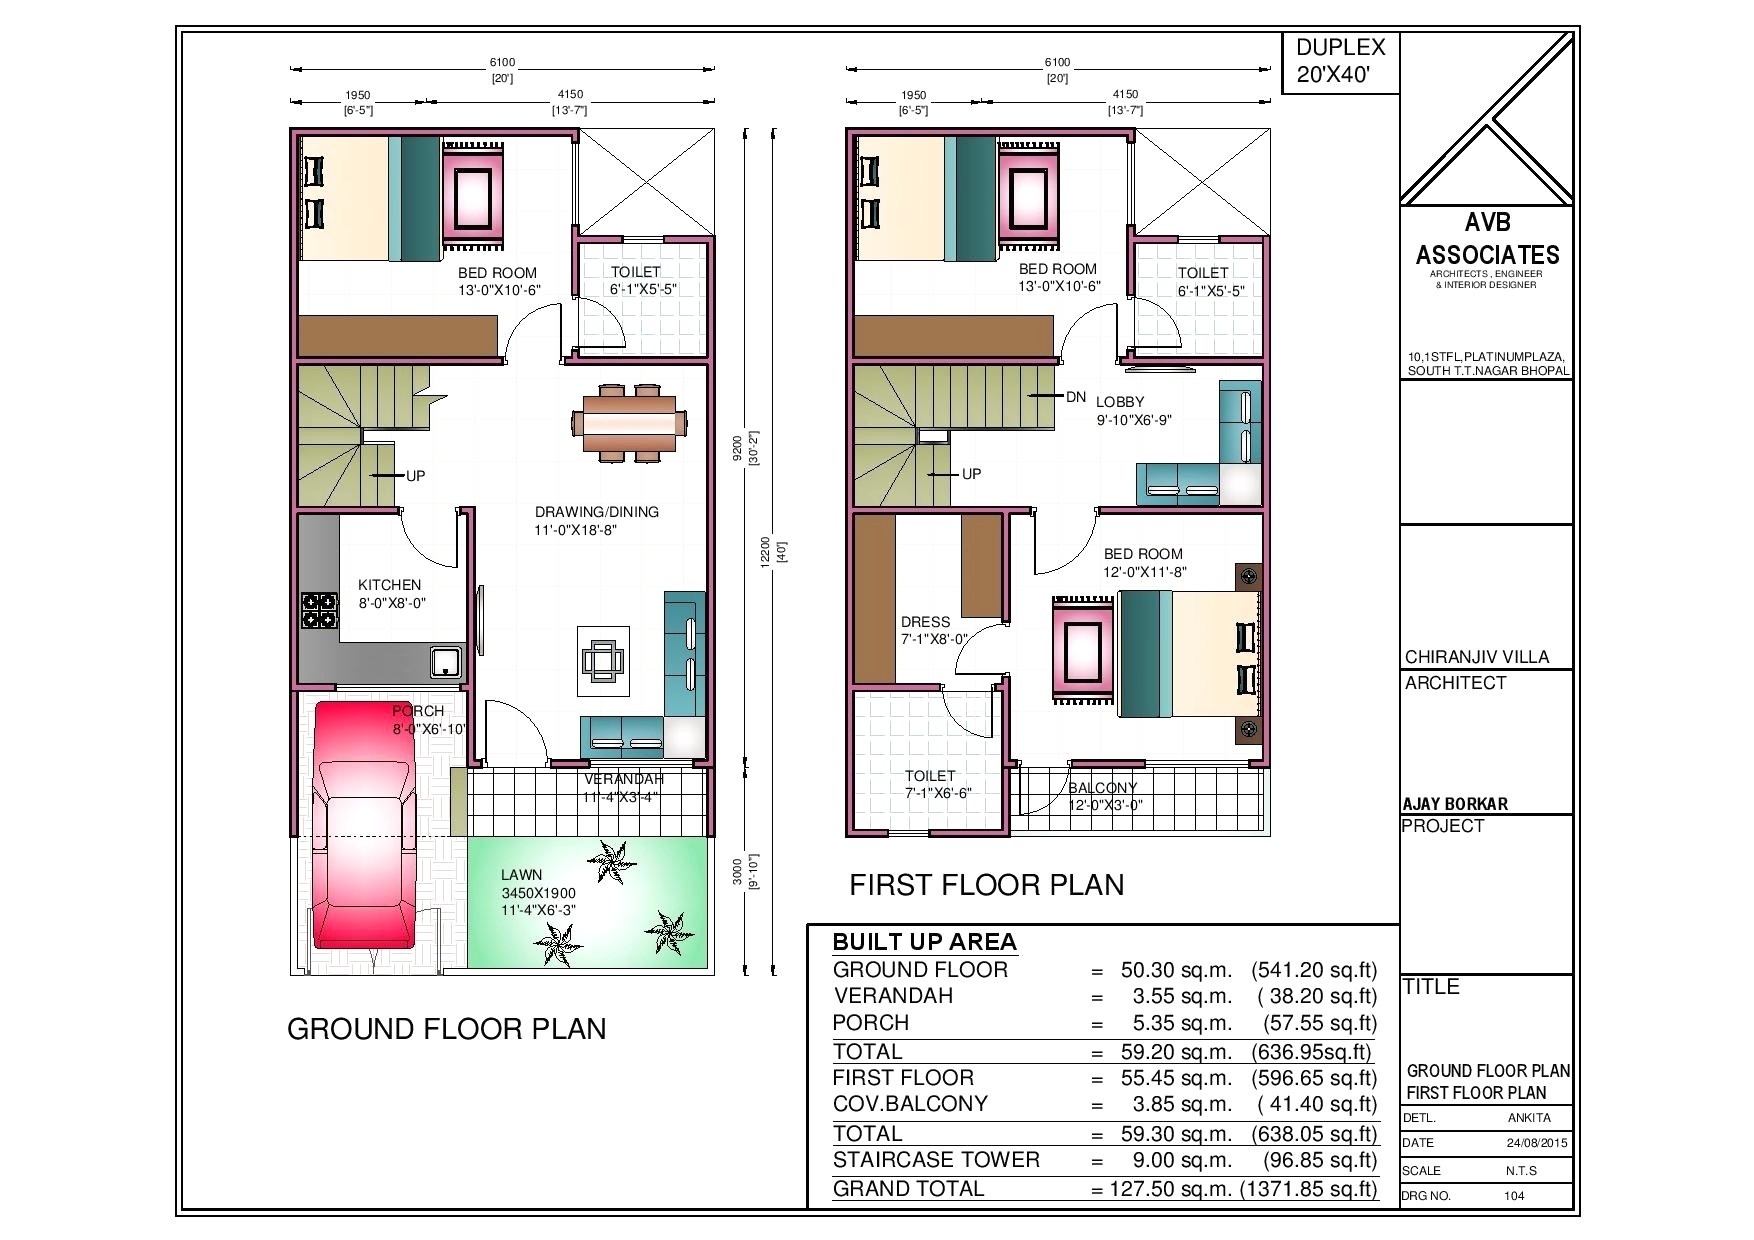 20 by 40 ft house plans best of 20 x 40 house floor plans beautiful 20